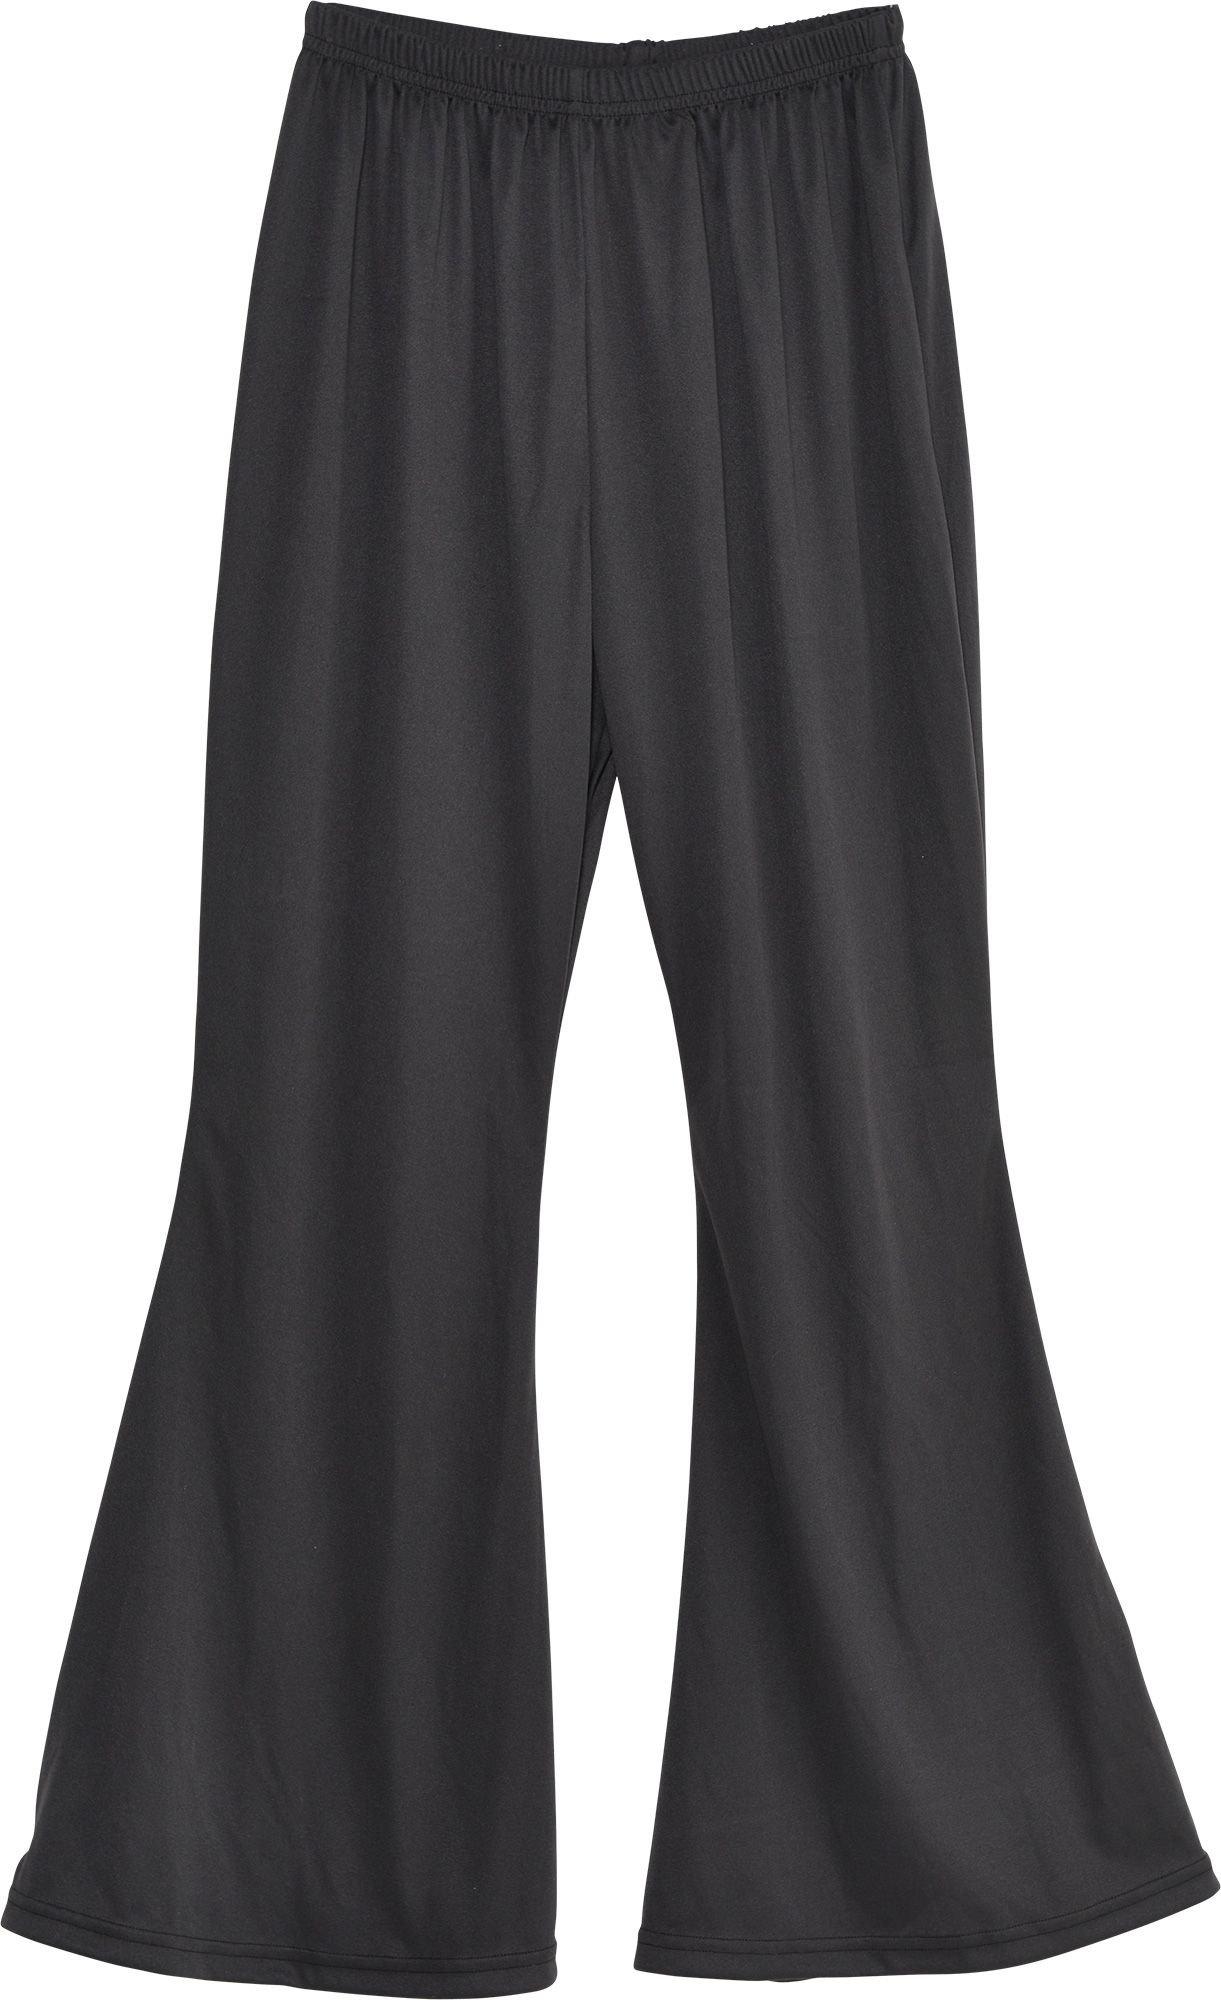 Black Bell Bottoms | Party City